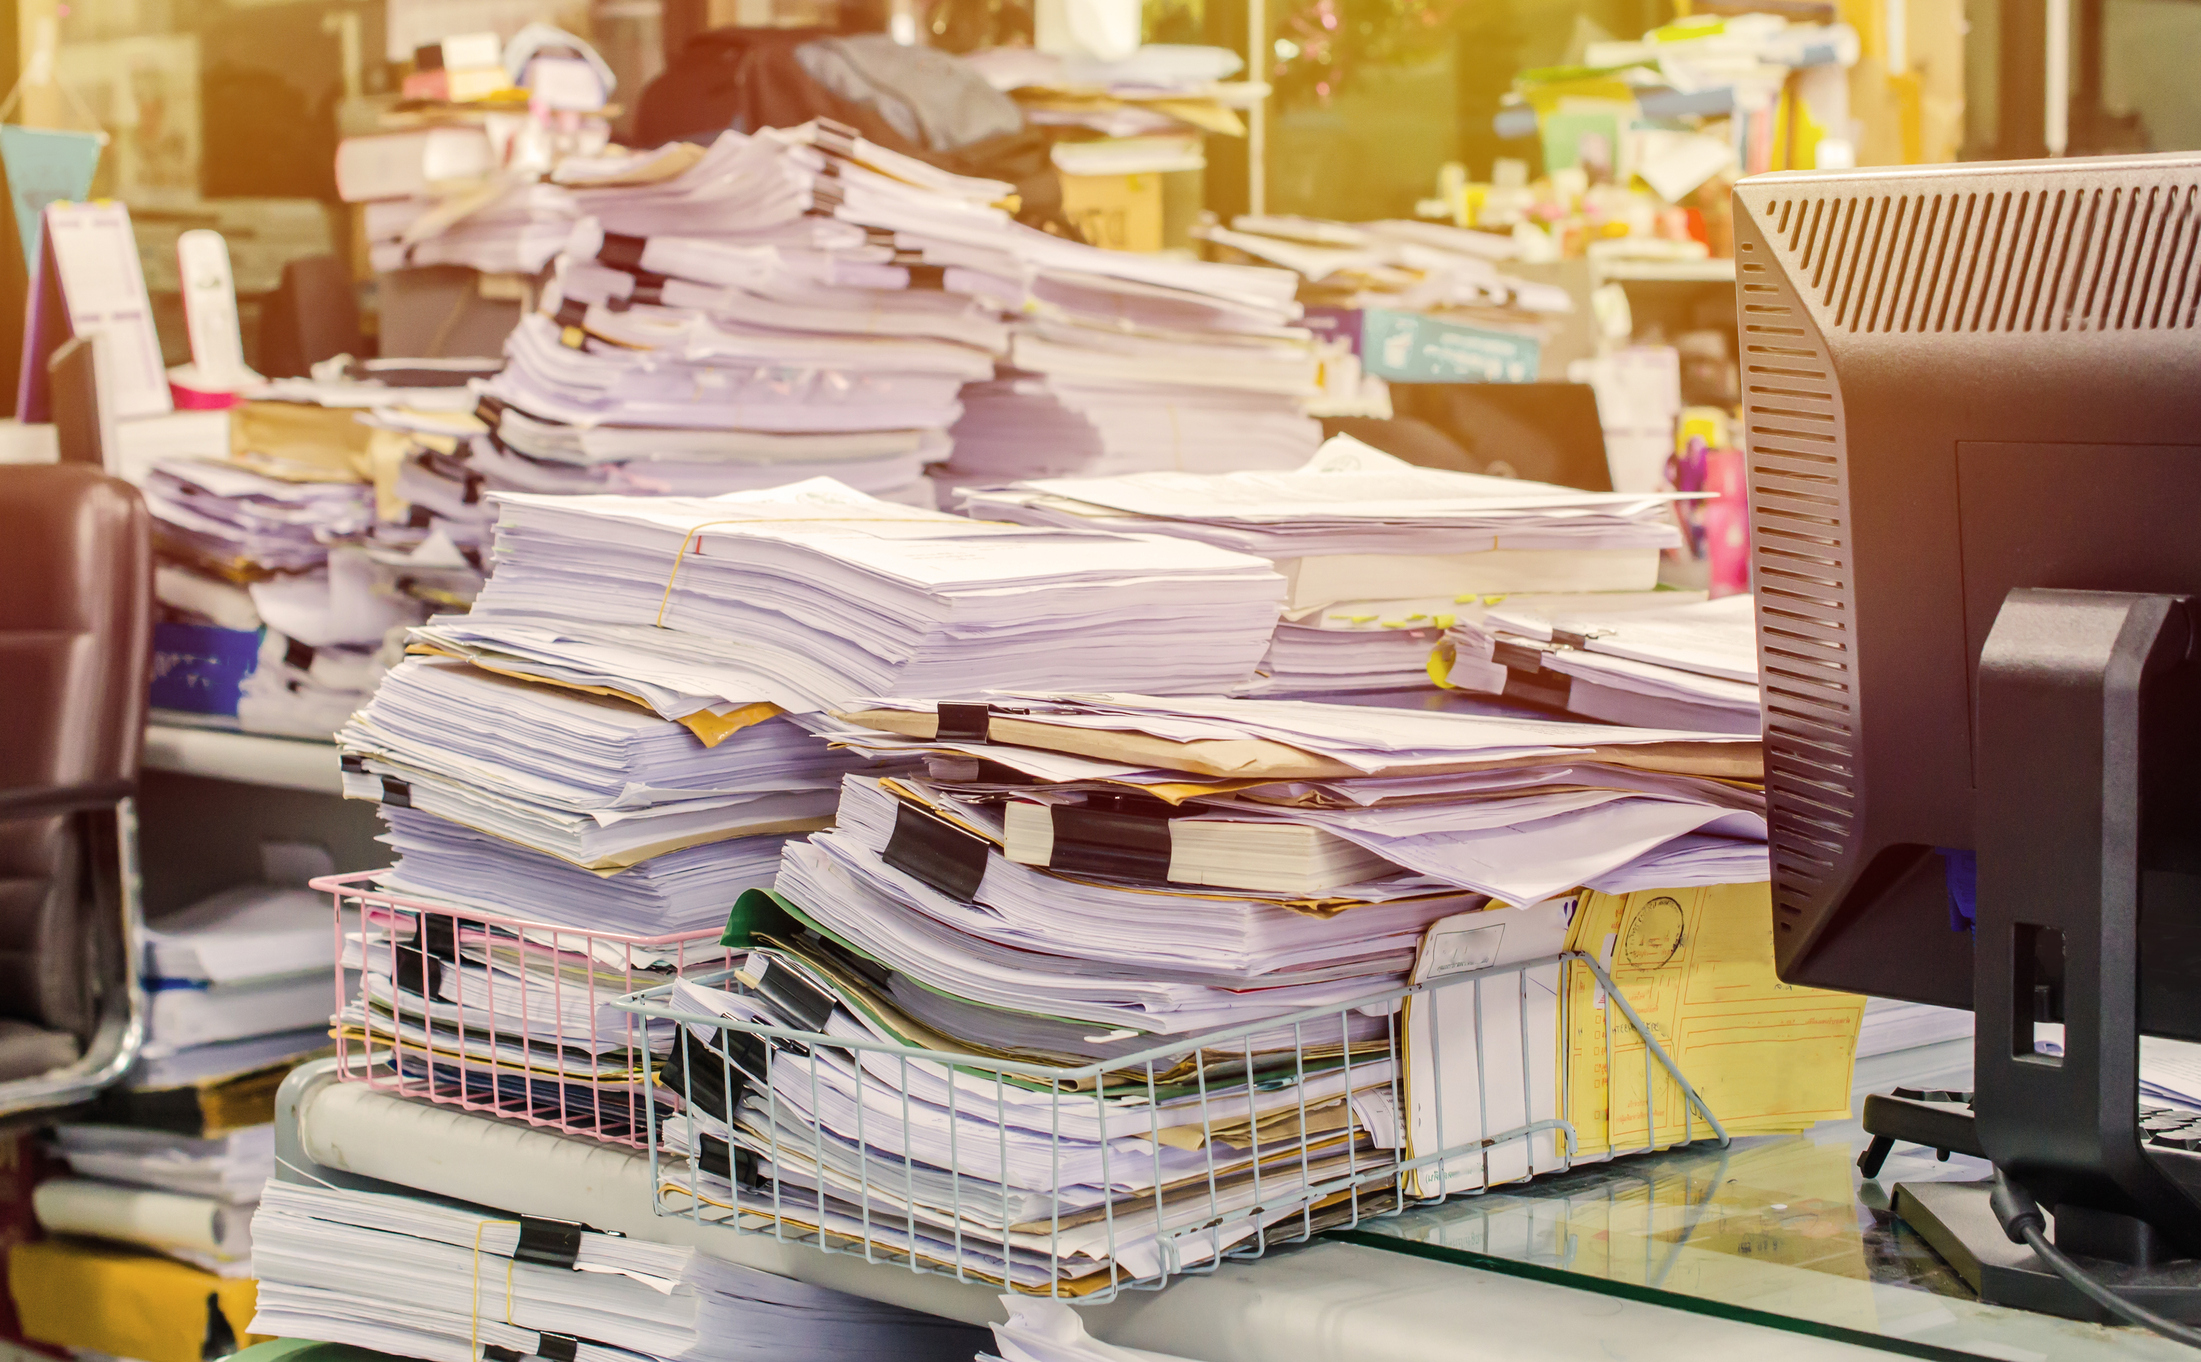 stacks of papers and files on a desk in an office